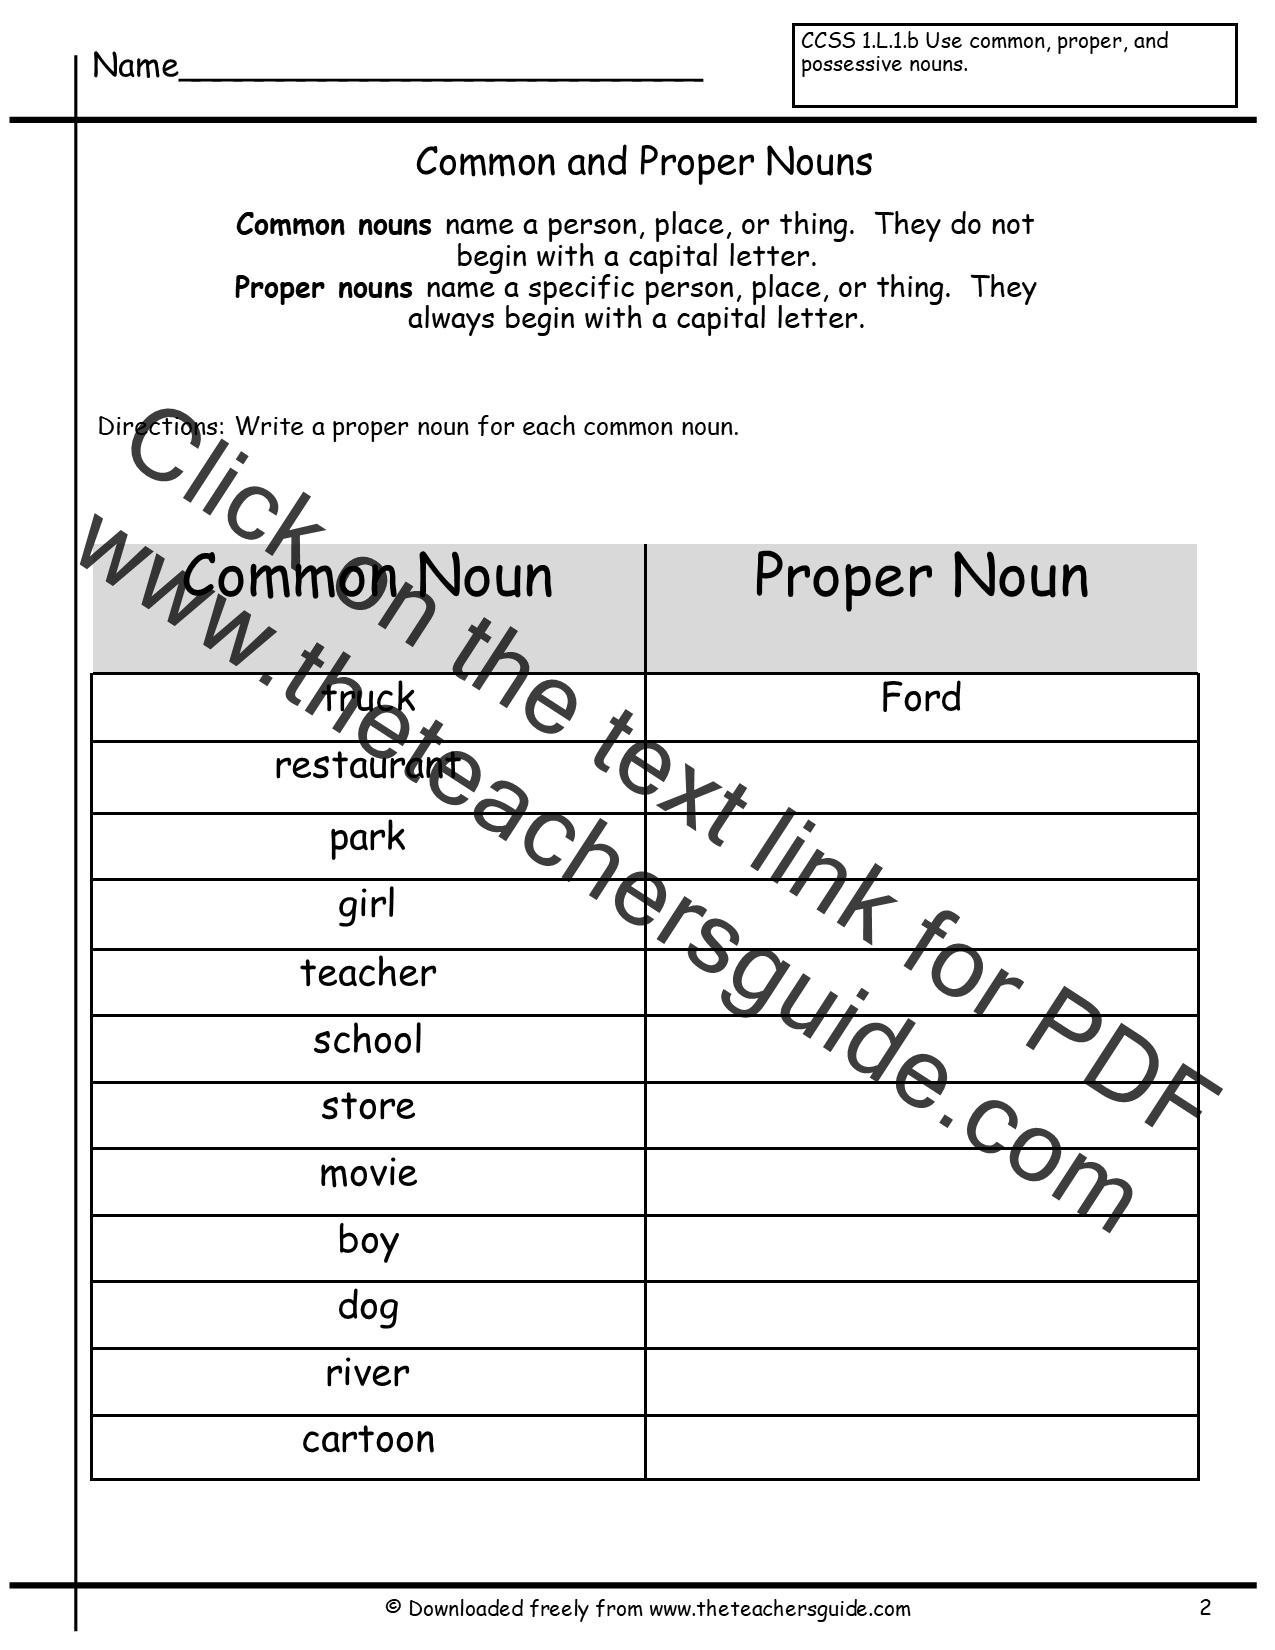 common-and-proper-noun-lesson-plans-5th-grade-lesson-plans-learning